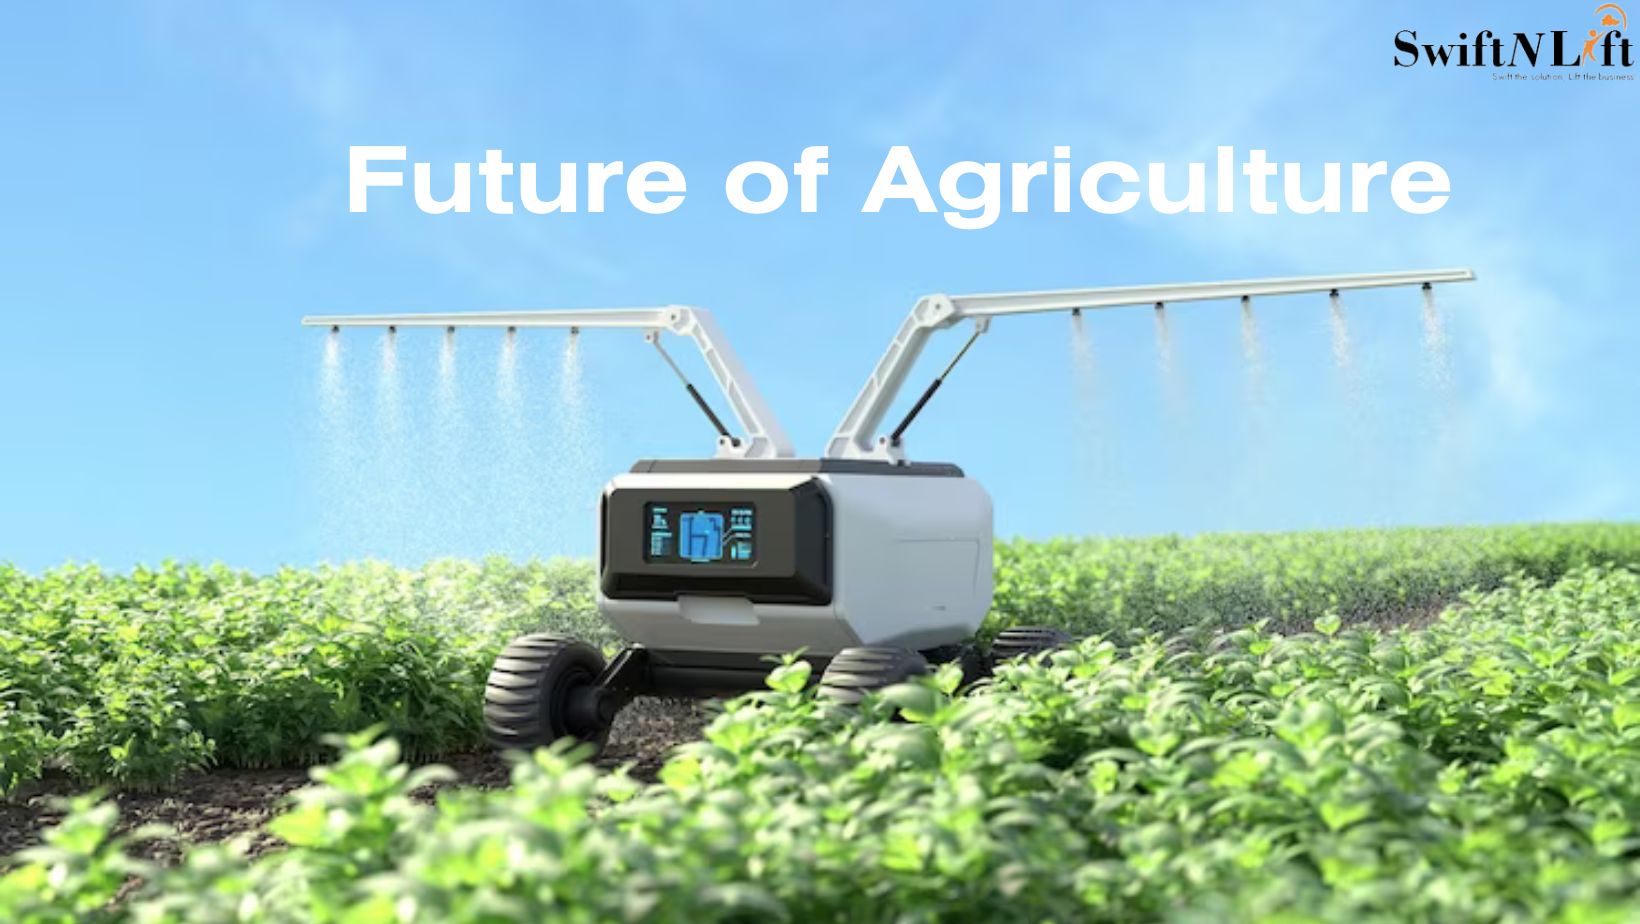 Harvesting the Future: How Technology is Revolutionizing Agriculture